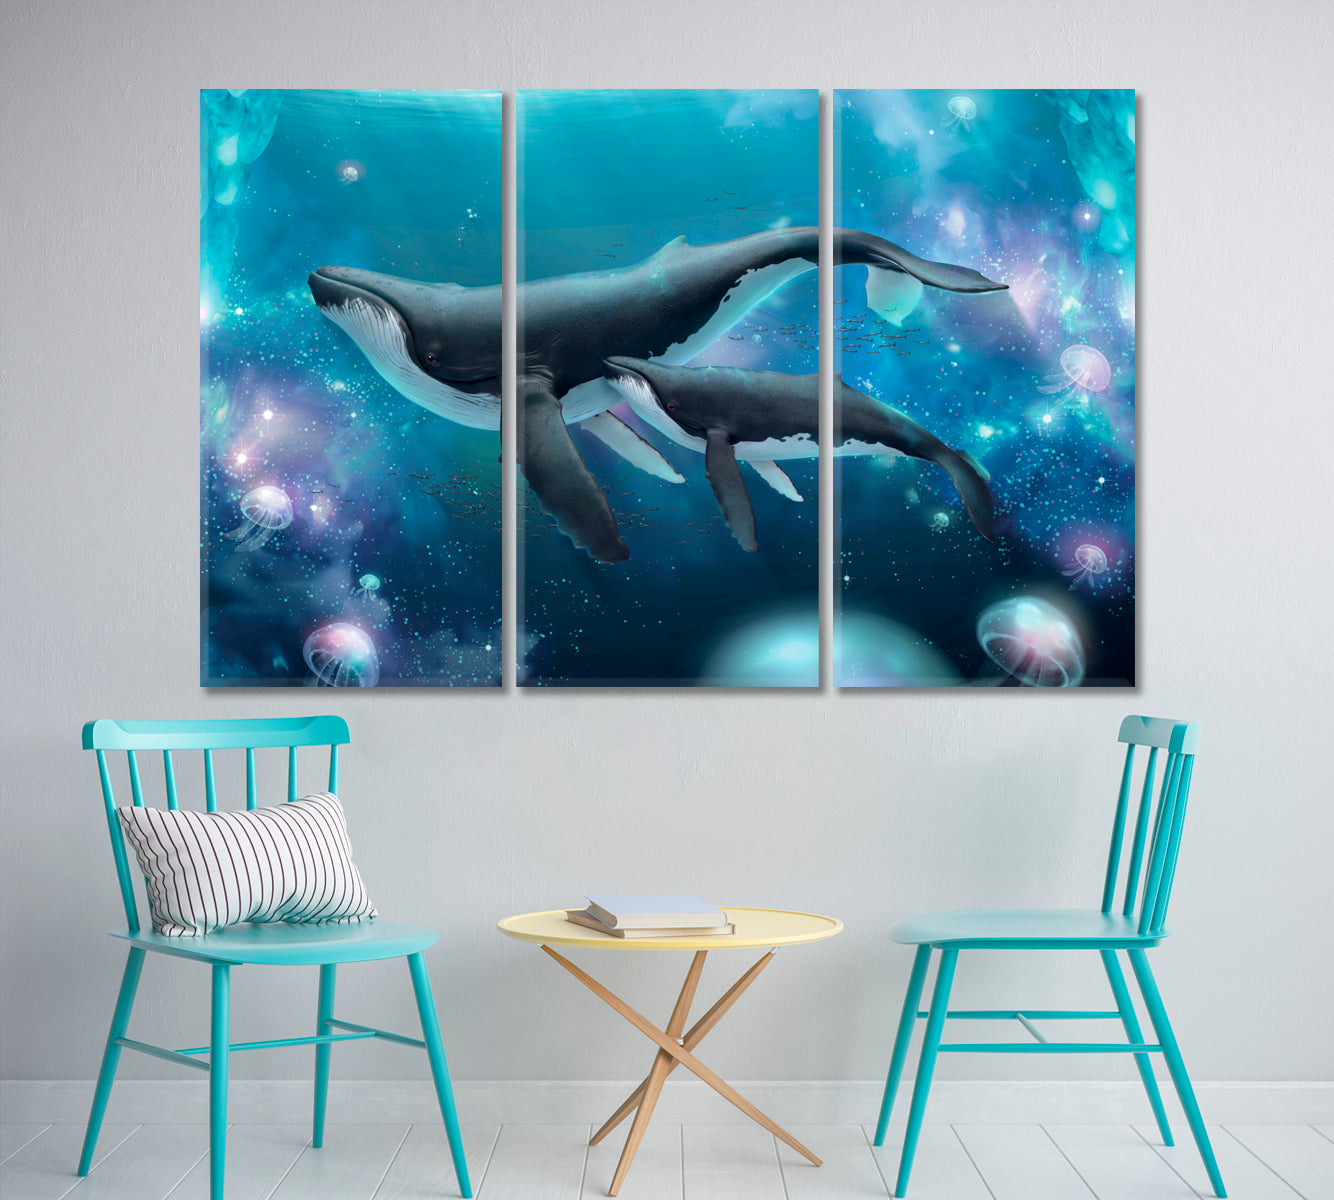 Whale Family Jellyfishes Ocean Underwater Sealife Watercolor Painting Nautical, Sea Life Pattern Art Artesty 3 panels 36" x 24" 